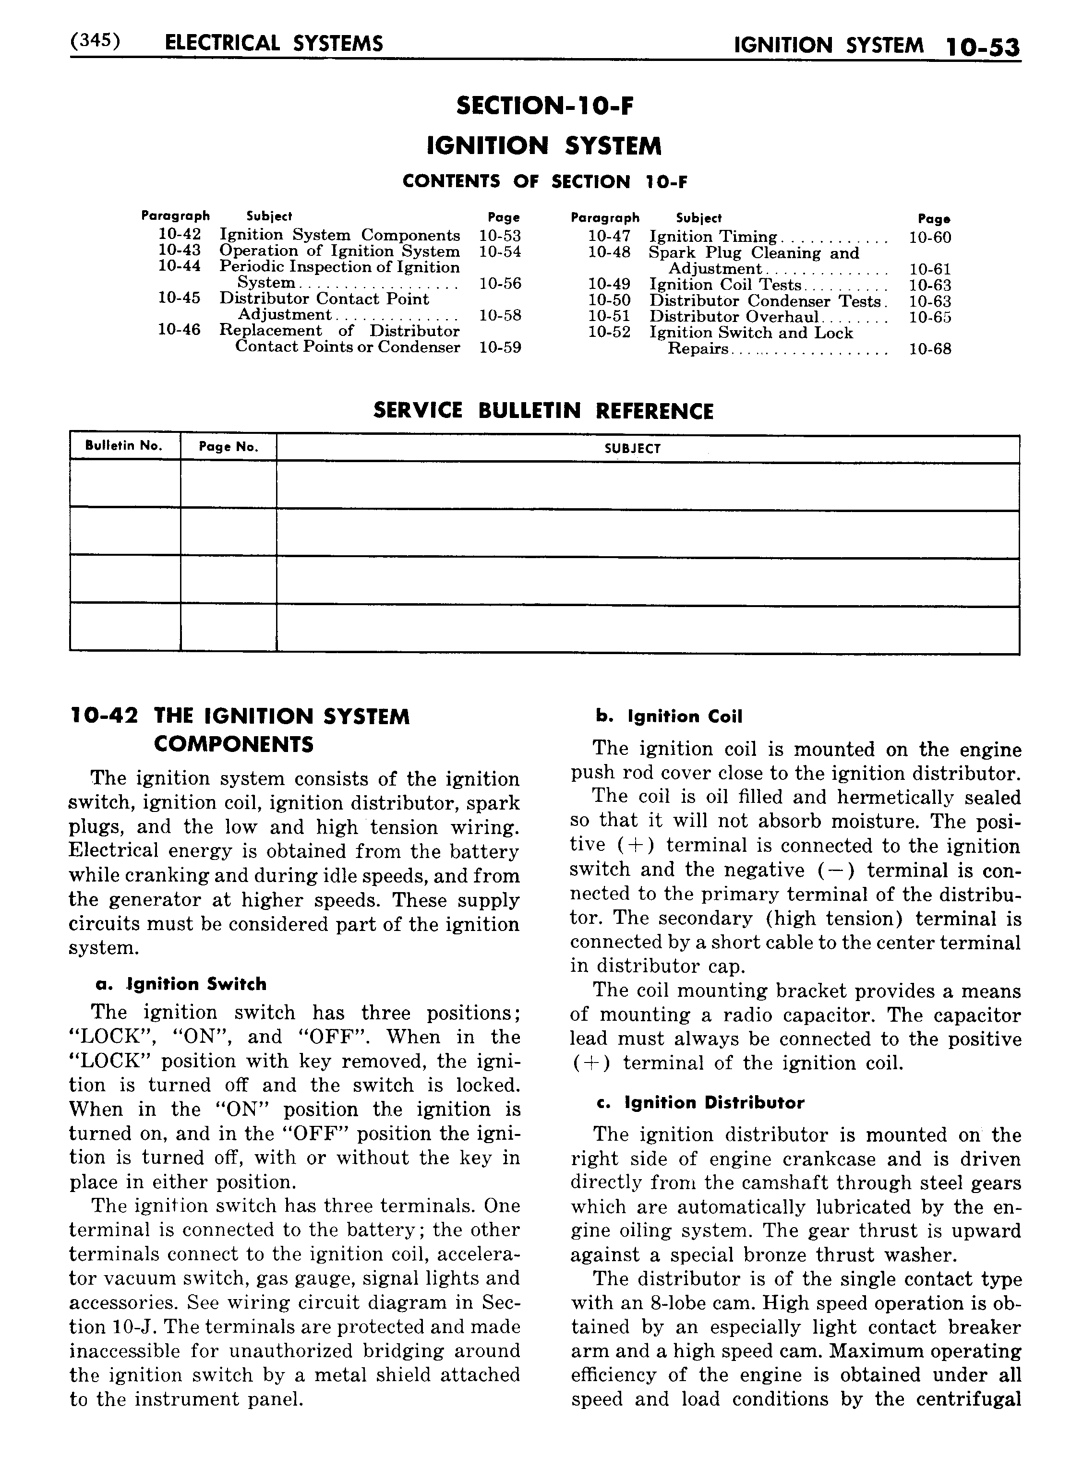 n_11 1951 Buick Shop Manual - Electrical Systems-053-053.jpg